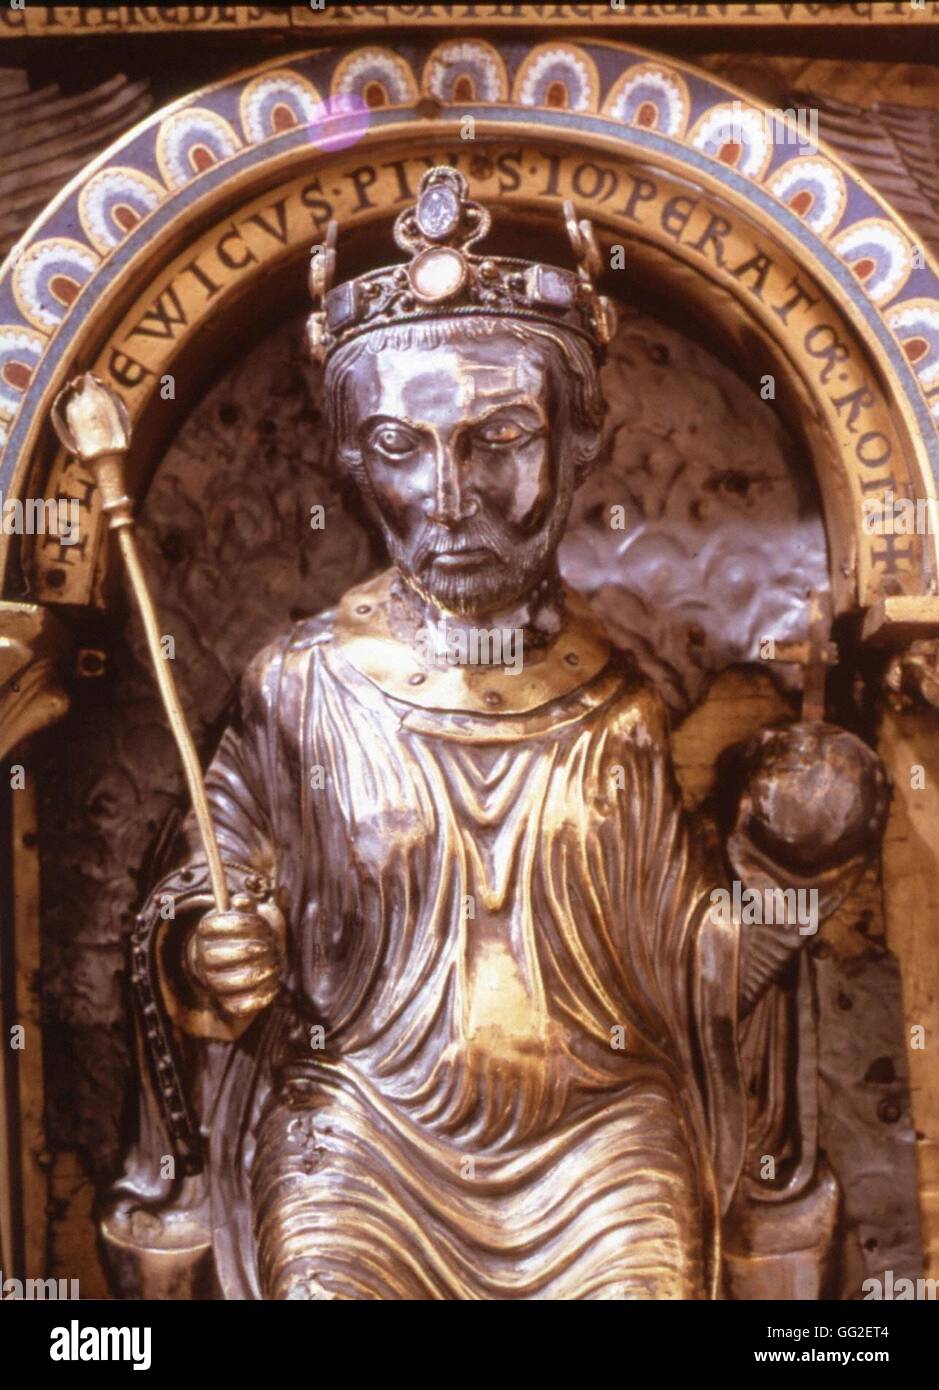 Aachen Treasure. The Charlemagne reliquary, ca. 1215. Detail: King Louis I (778-840) Middle Ages France Germany / Aachen Cathedral Stock Photo